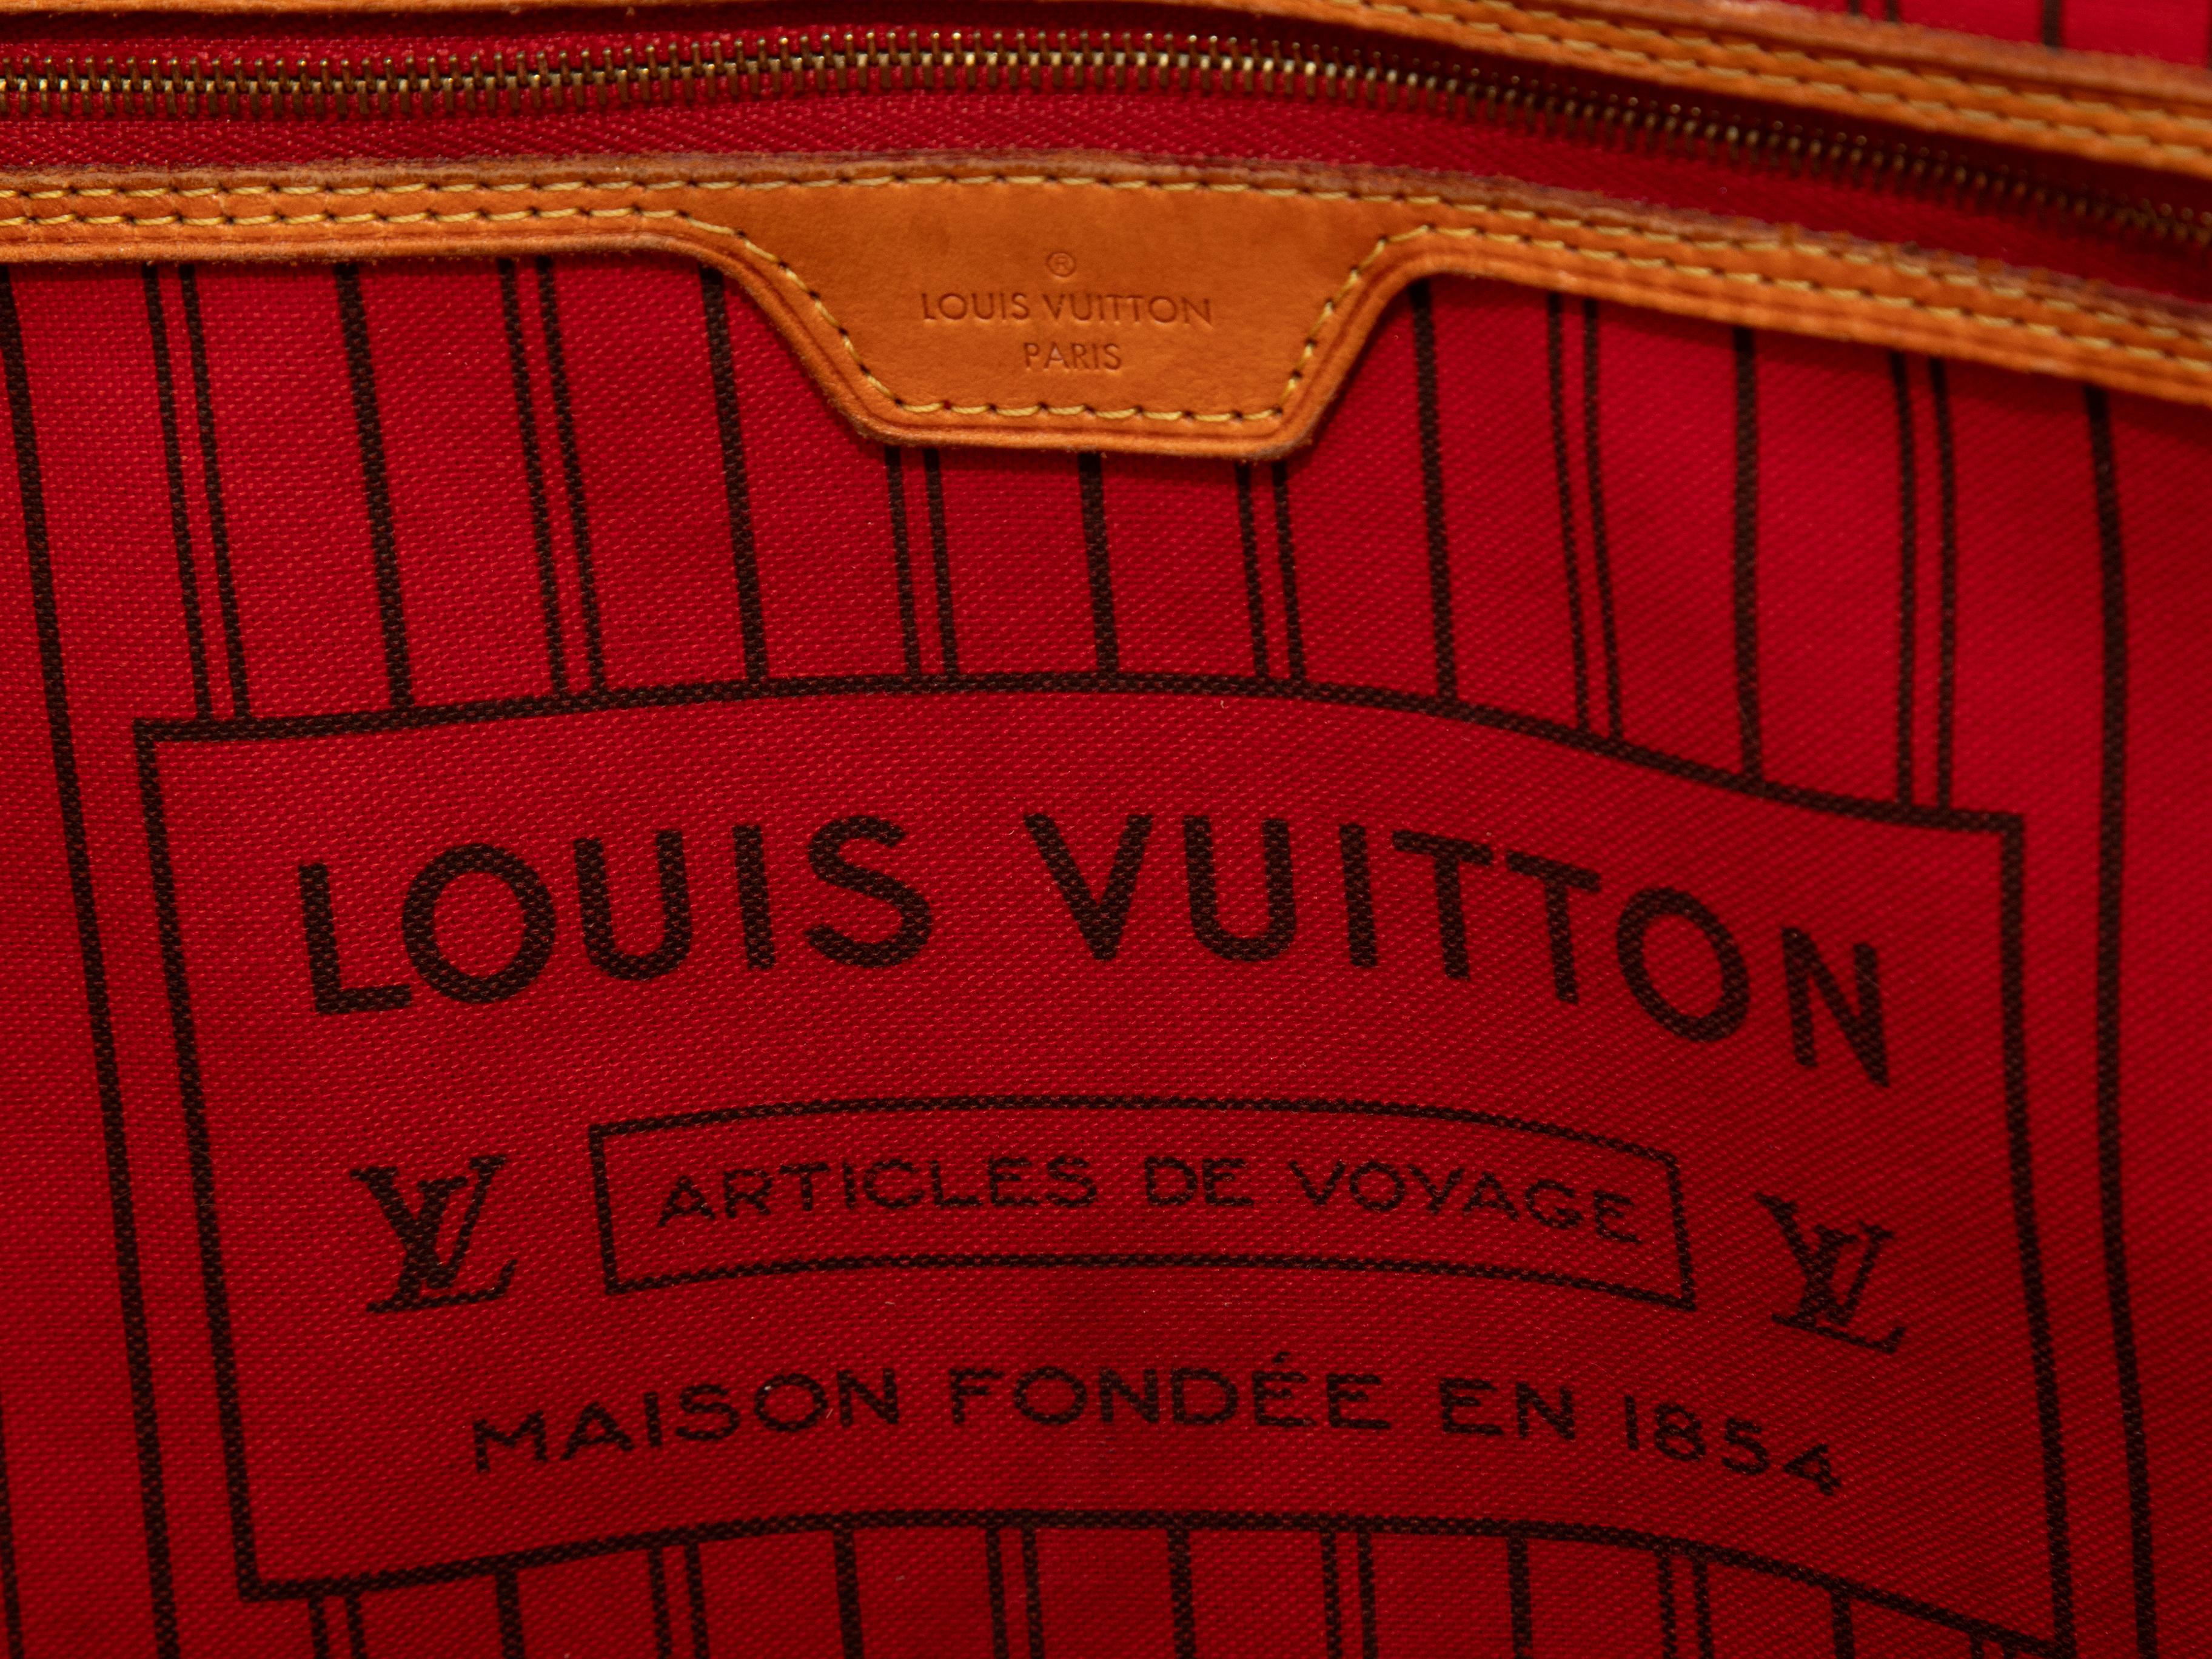 Vintage Brown Louis Vuitton Monogram Neverfull GM Bag. The Neverfull GM Bag features a coated canvas body, leather trim throughout, gold-tone hardware, a matching zip pouch, and dual flat shoulder straps. 22